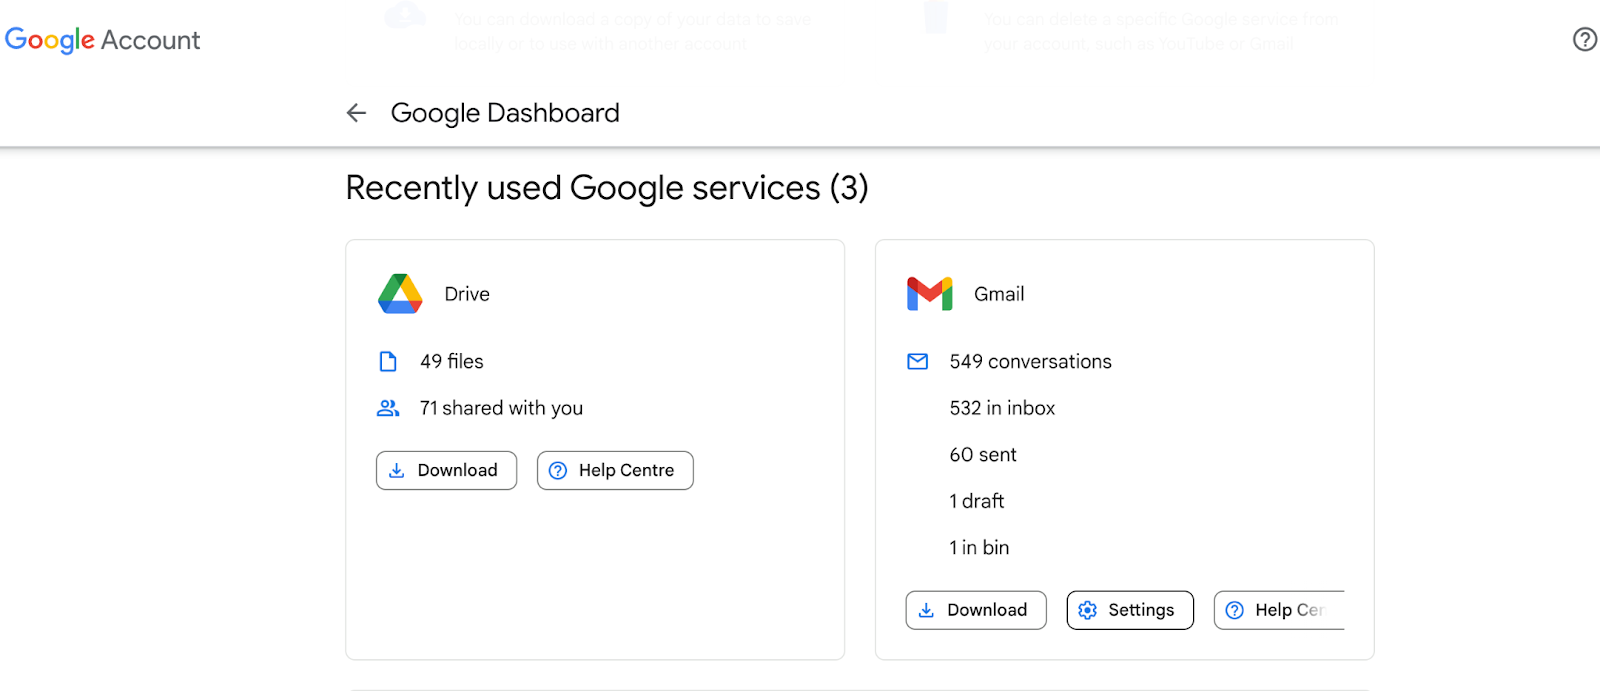 Recently used Google Services reports in Google Dashboard